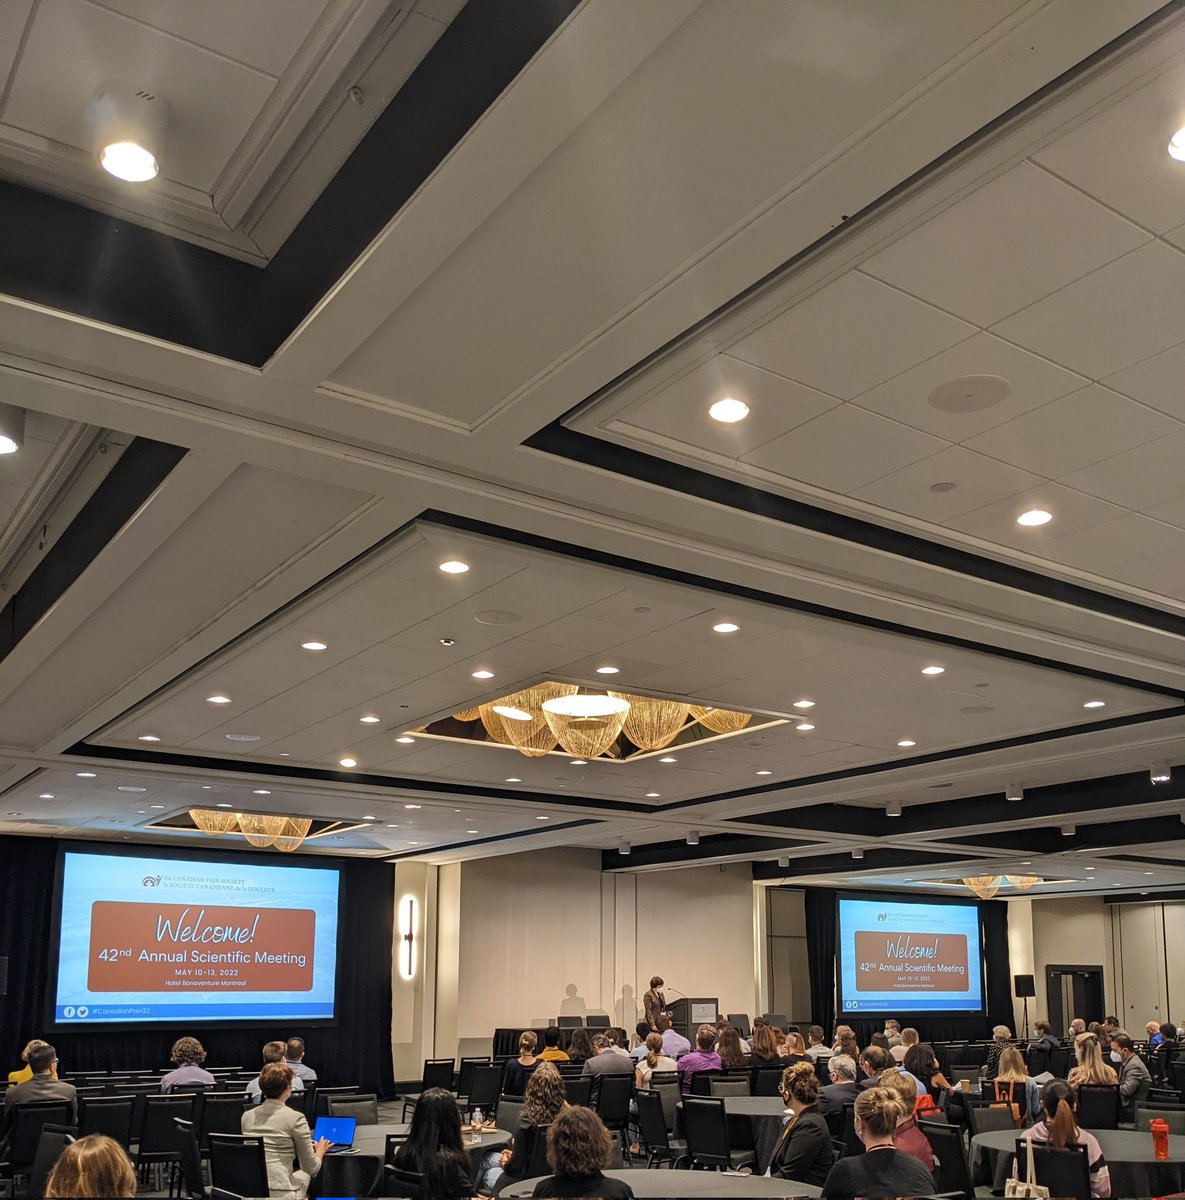 It has started! We're very excited to attend our first in-person conference in the last 2 years! @CanadianPain #CanadianPain22